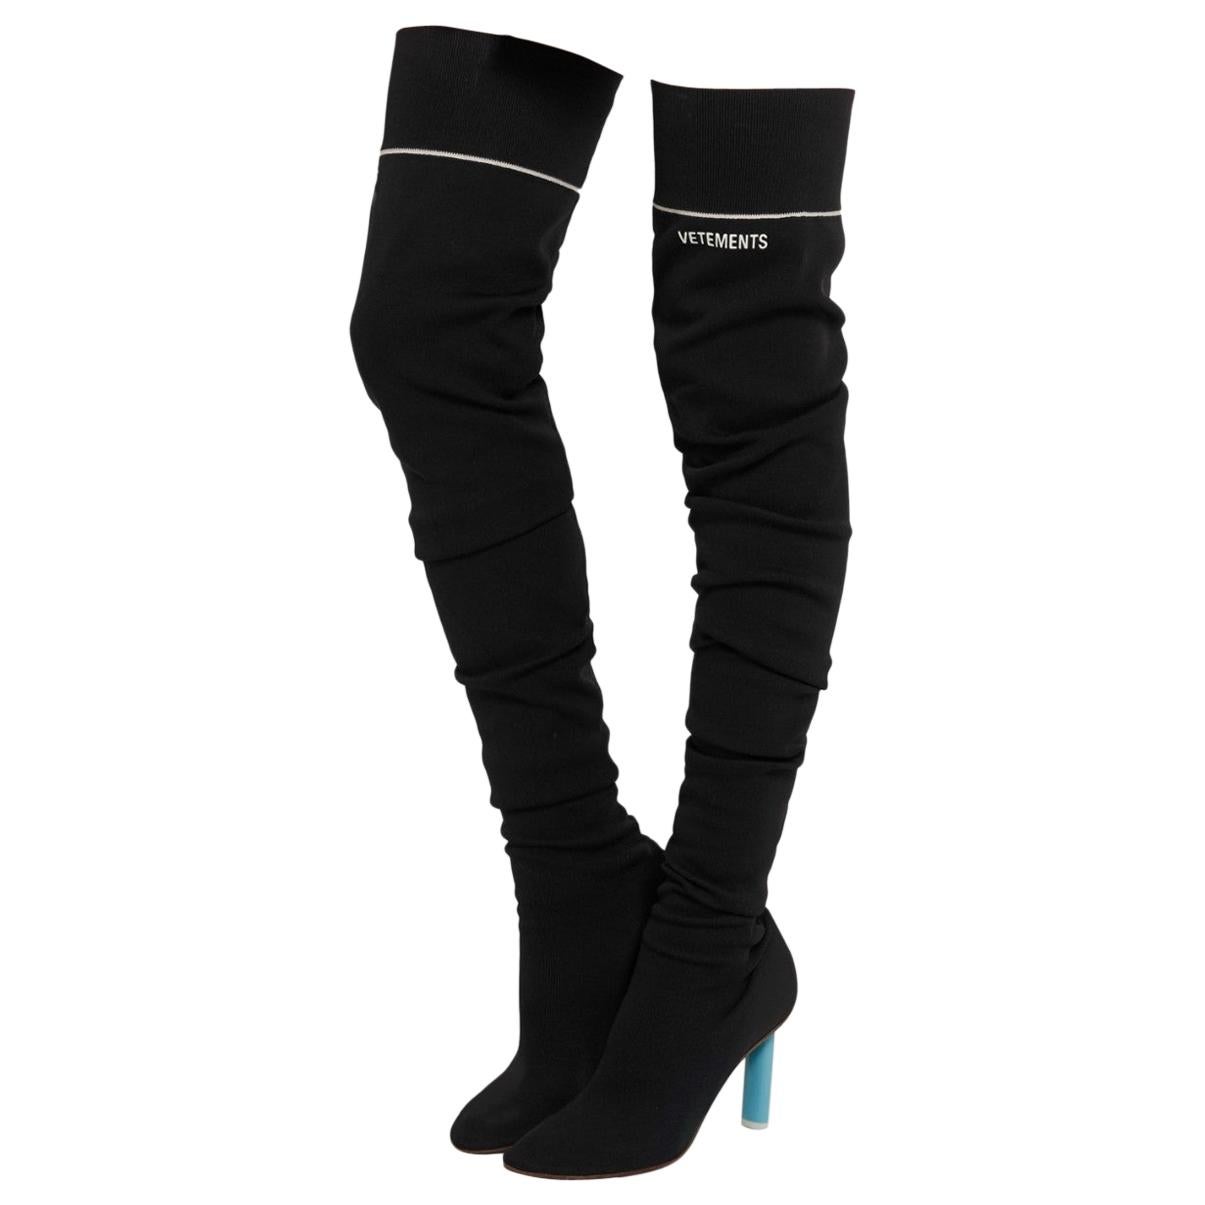 Vetements Black Sock jersey over-the-knee boots - Size 39 